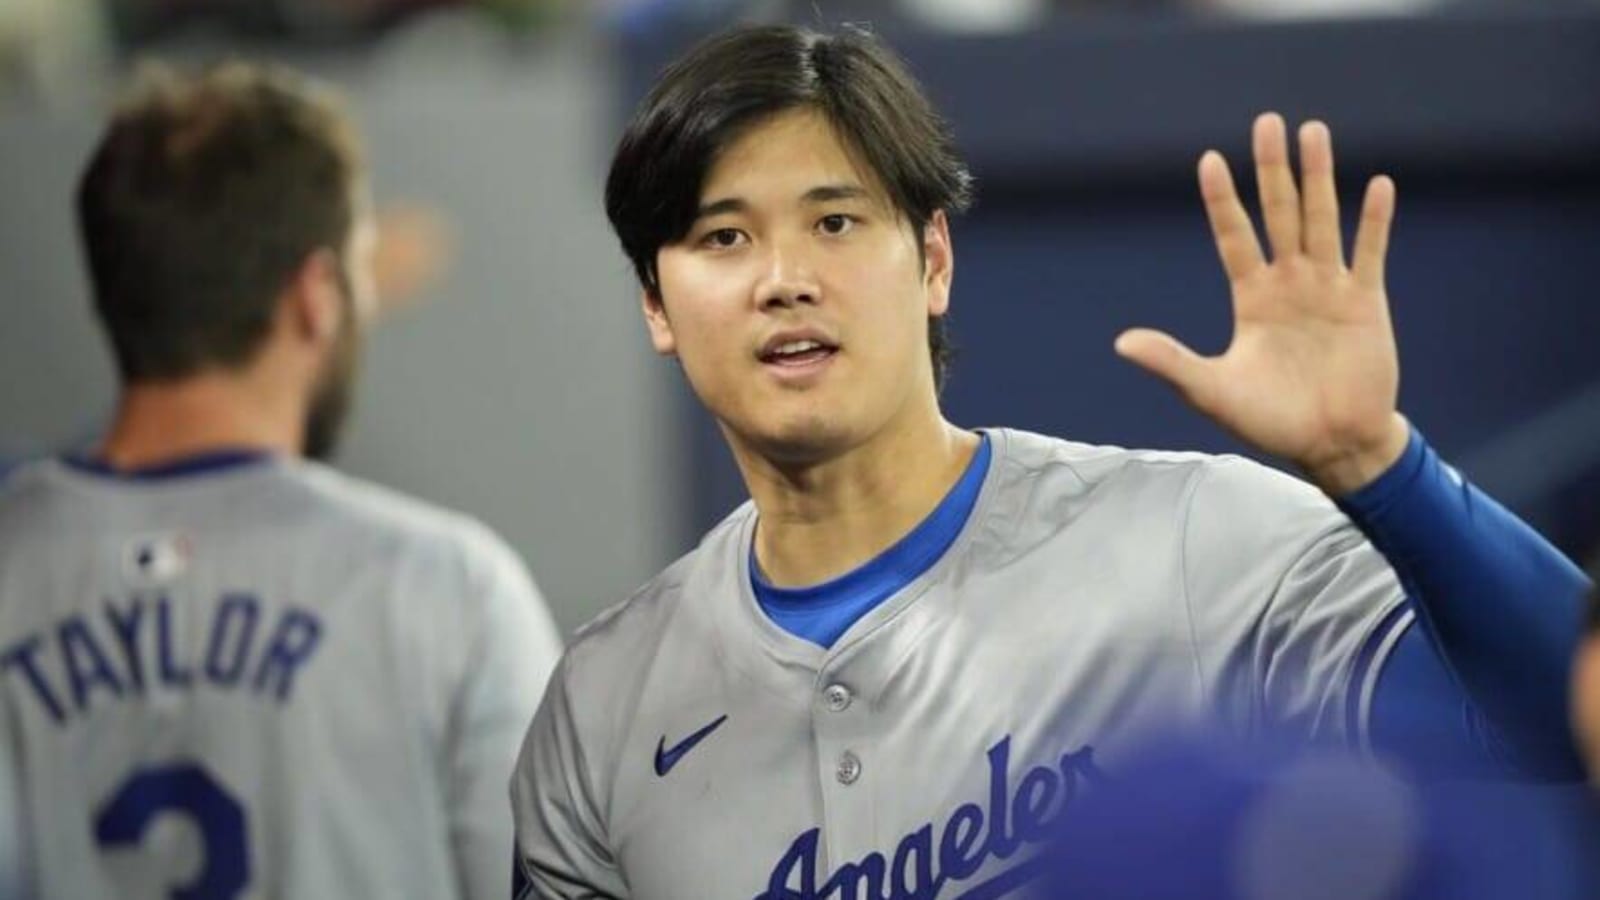  Shohei Ohtani Grateful For Teams’ Interest But ‘Could Only Choose One’